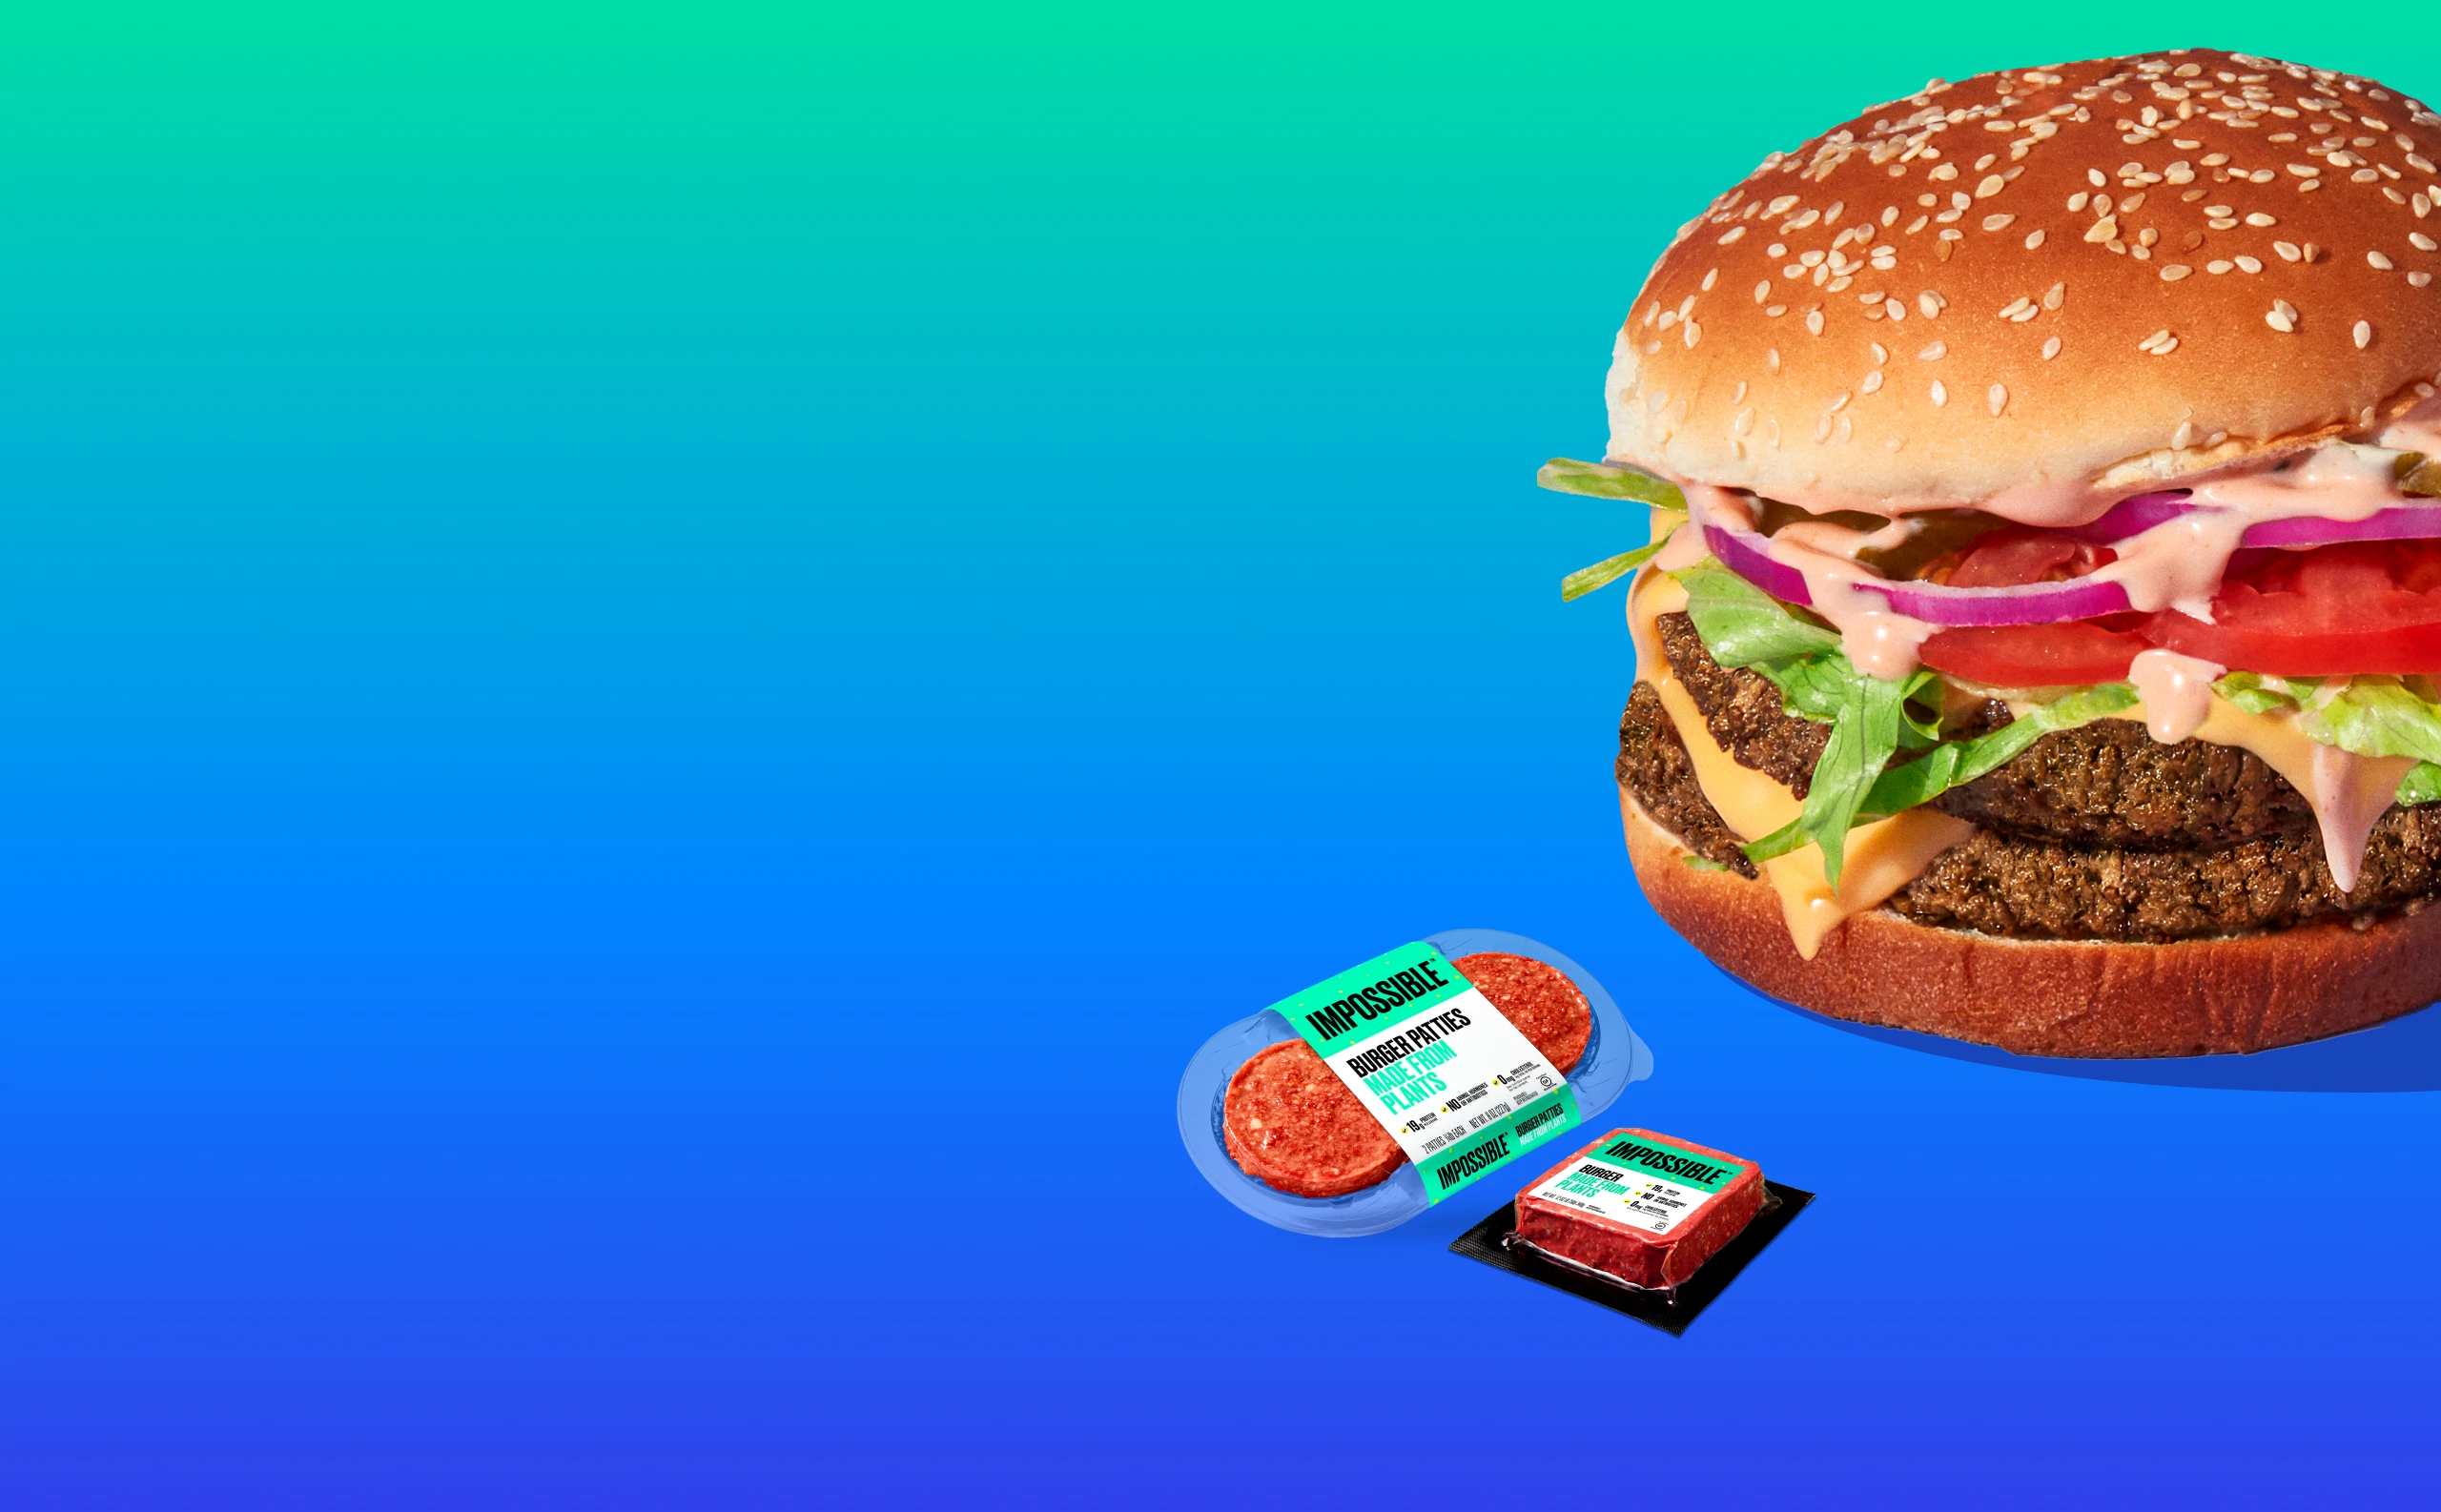 Impossible Burger hero shot, grocery 12 oz pack and patty 2-pack on a green/blue gradient background.